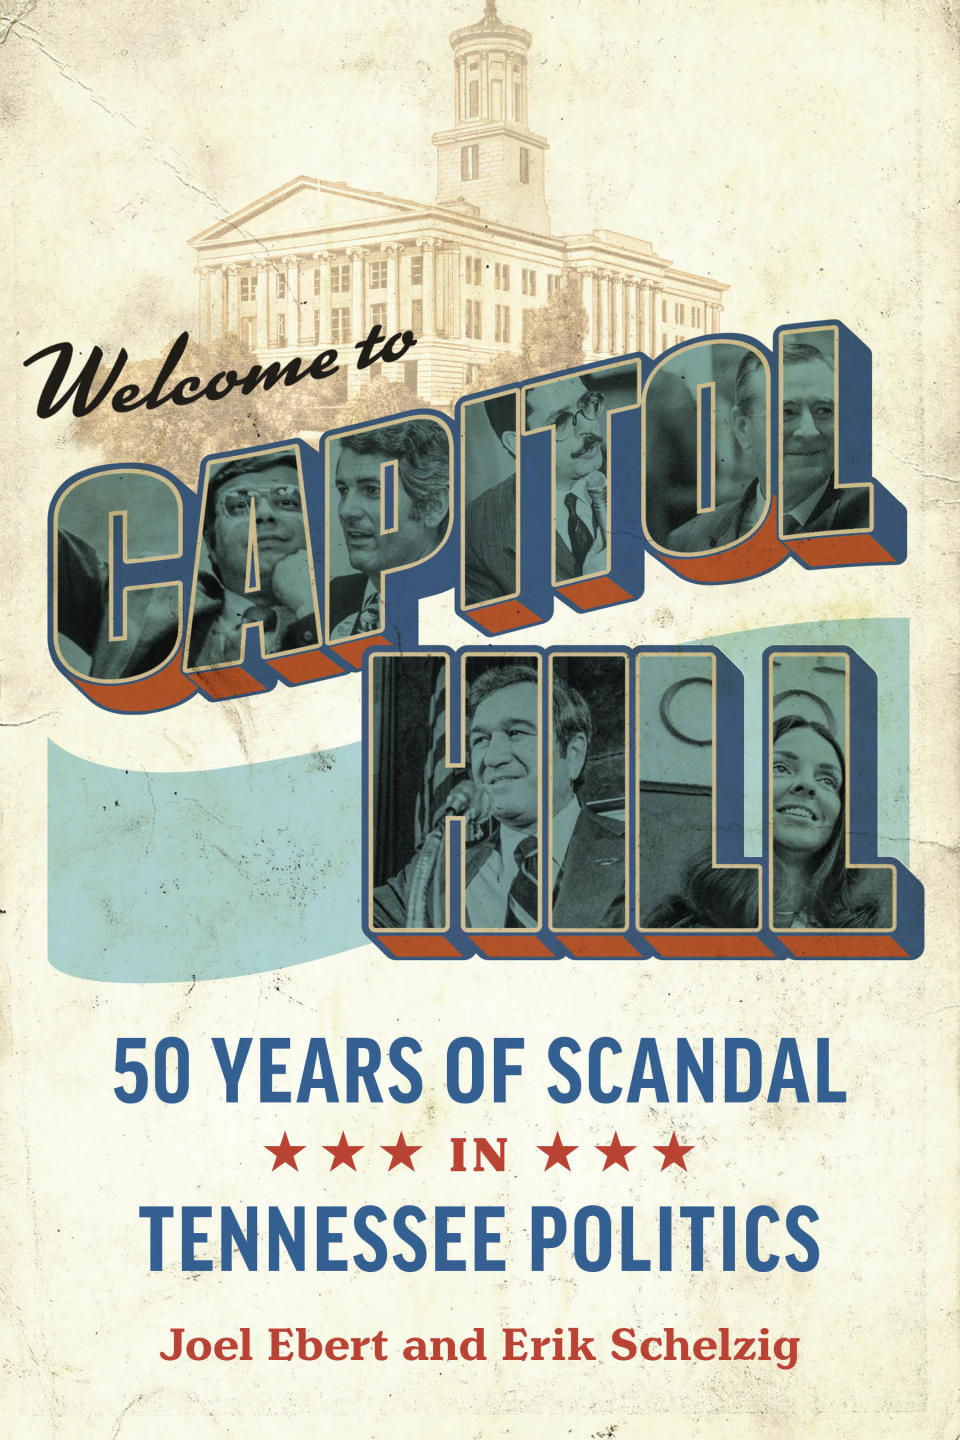 "Welcome to Capitol Hill: 50 Years of Scandal in Tennessee Politics," by Joel Ebert and Erik Schelzig was published in August 2023 by Vanderbilt University Press.